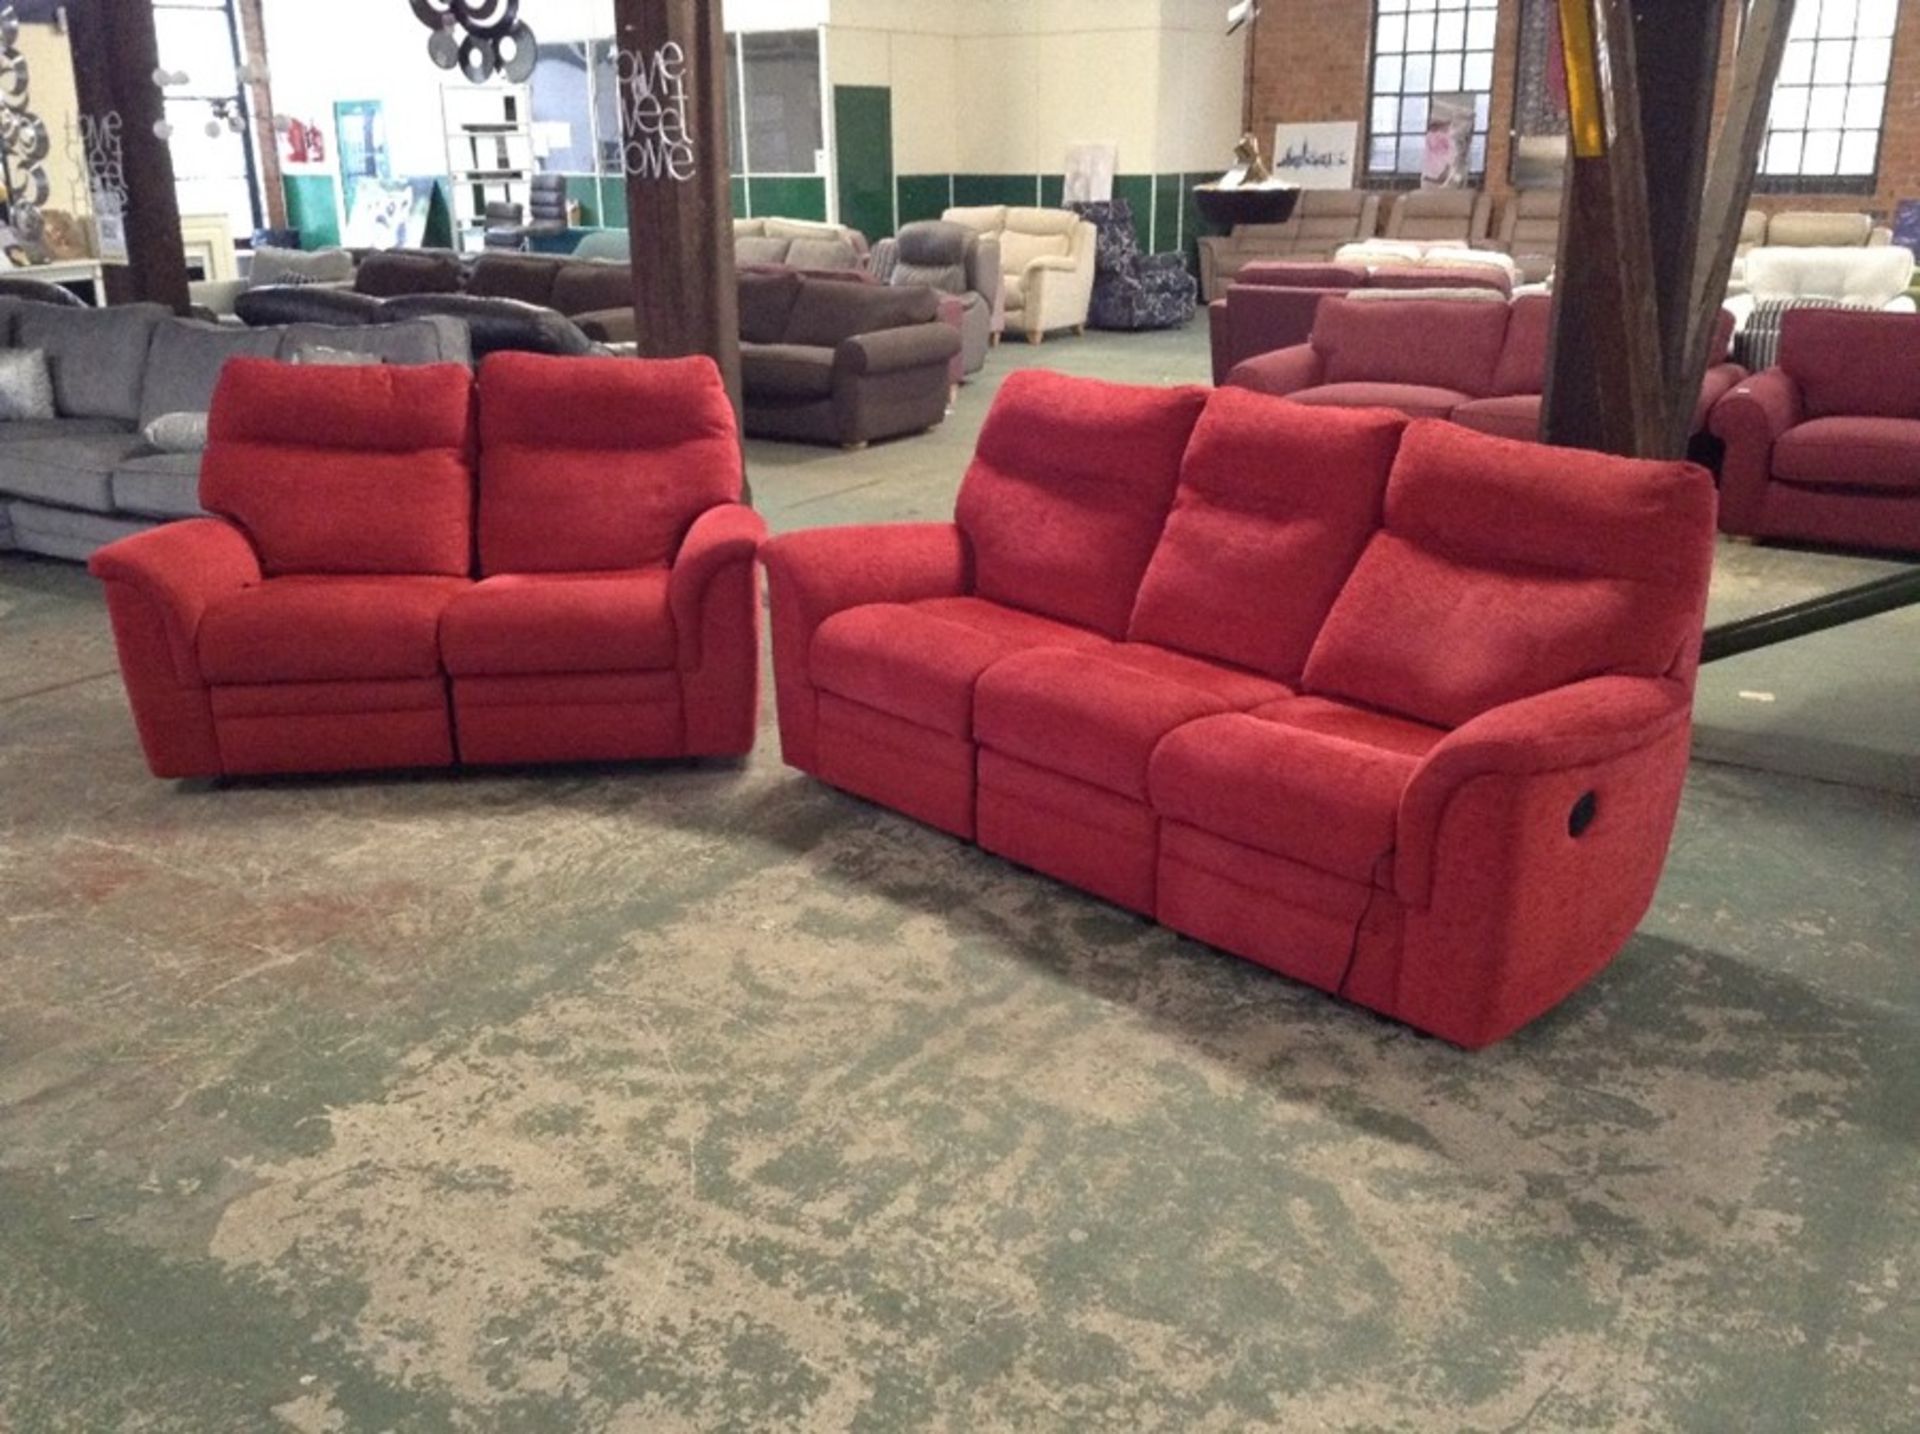 RED HIGH BACK ELECTRIC RECLINING 3 SEATER SOFA & 2